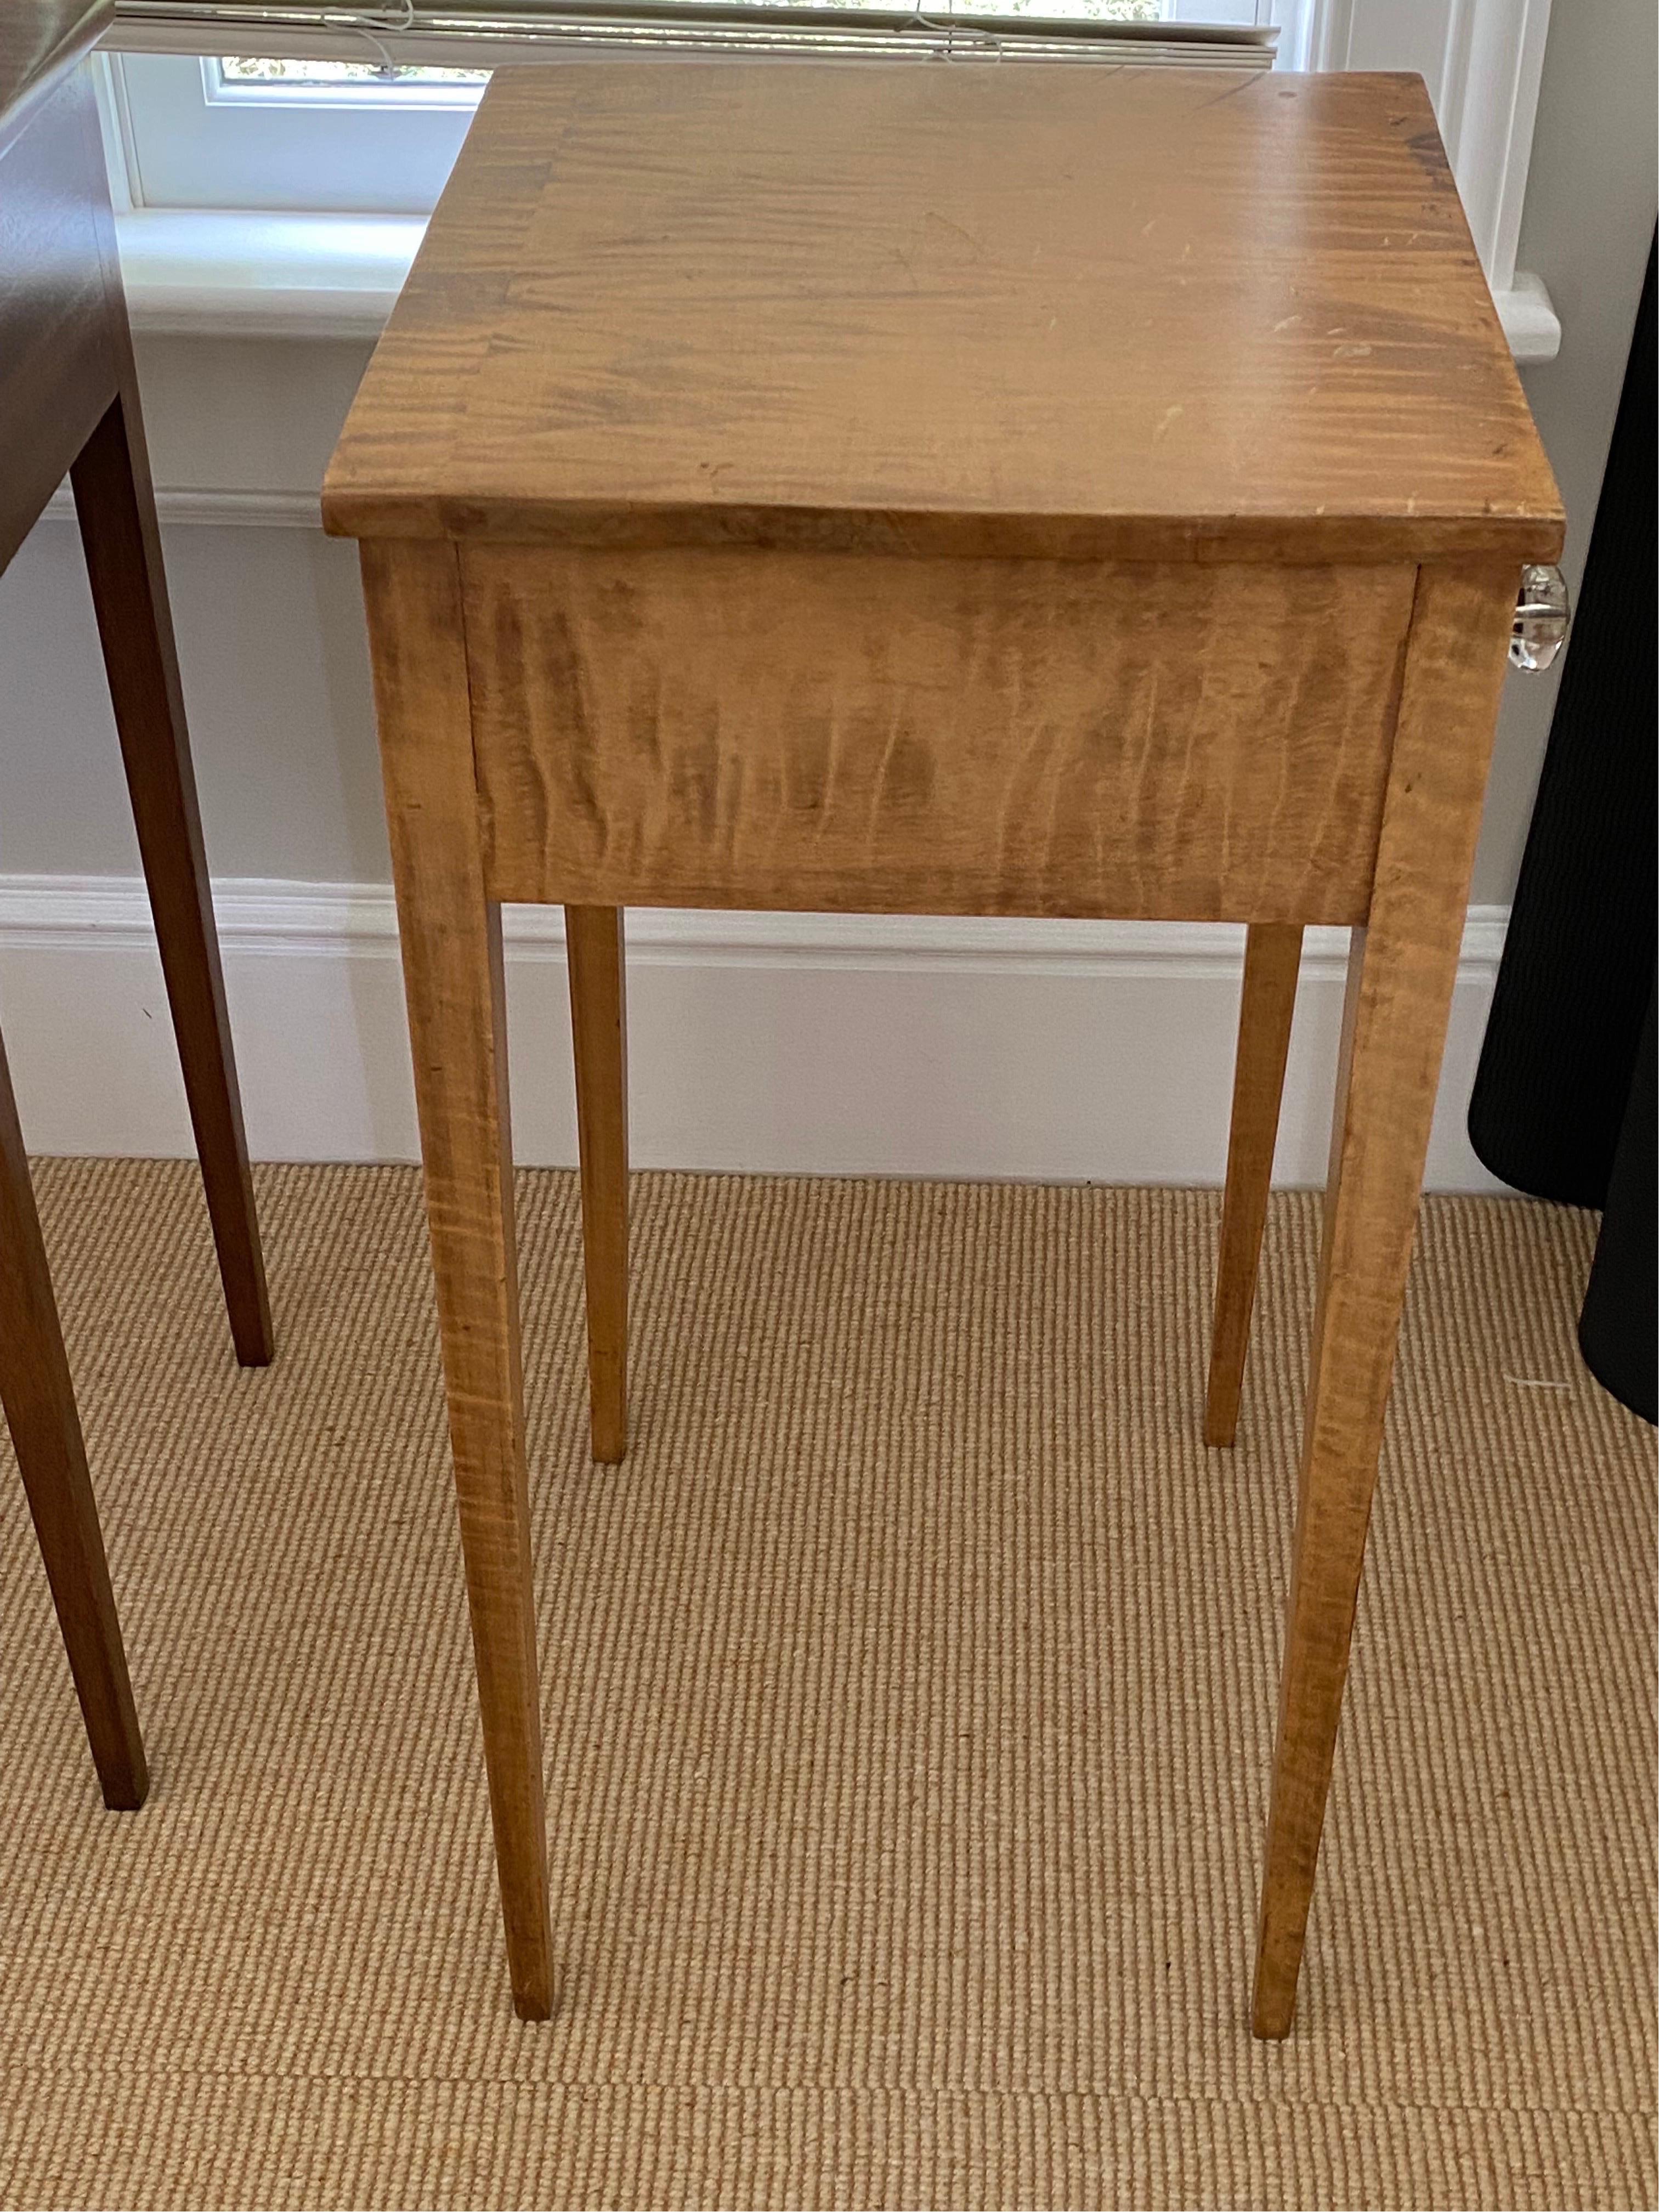 19th Century American Sheraton Tiger Maple Single Drawer Stand with Glass Knobs For Sale 5